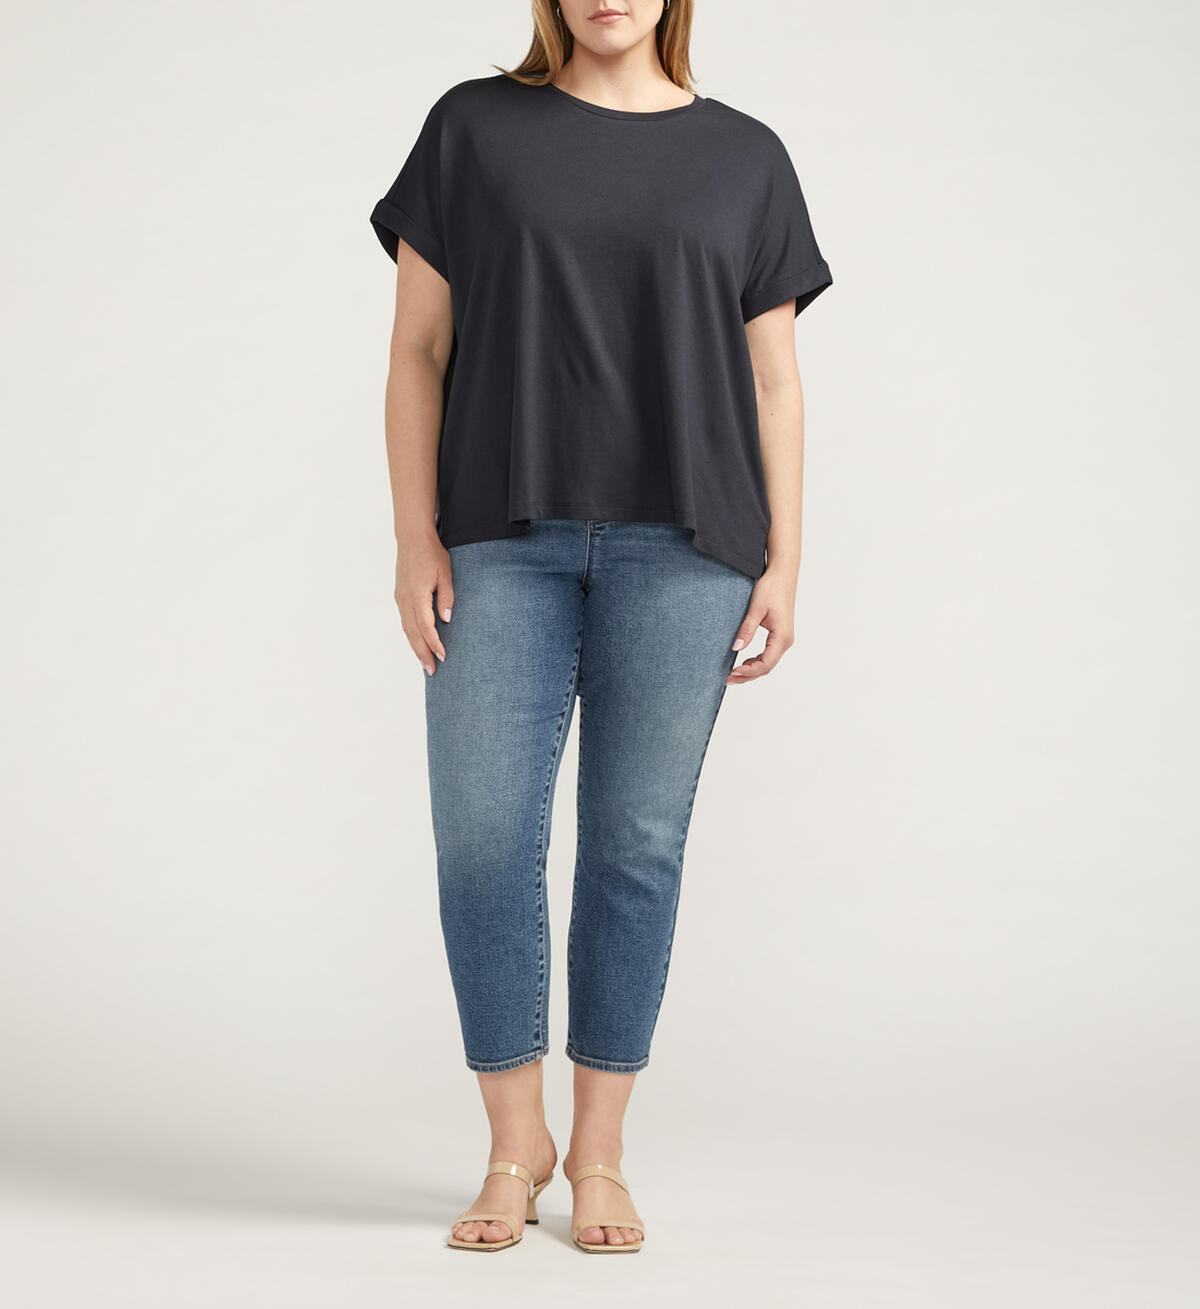 Drapey Luxe Tee Plus Size, , hi-res image number 0